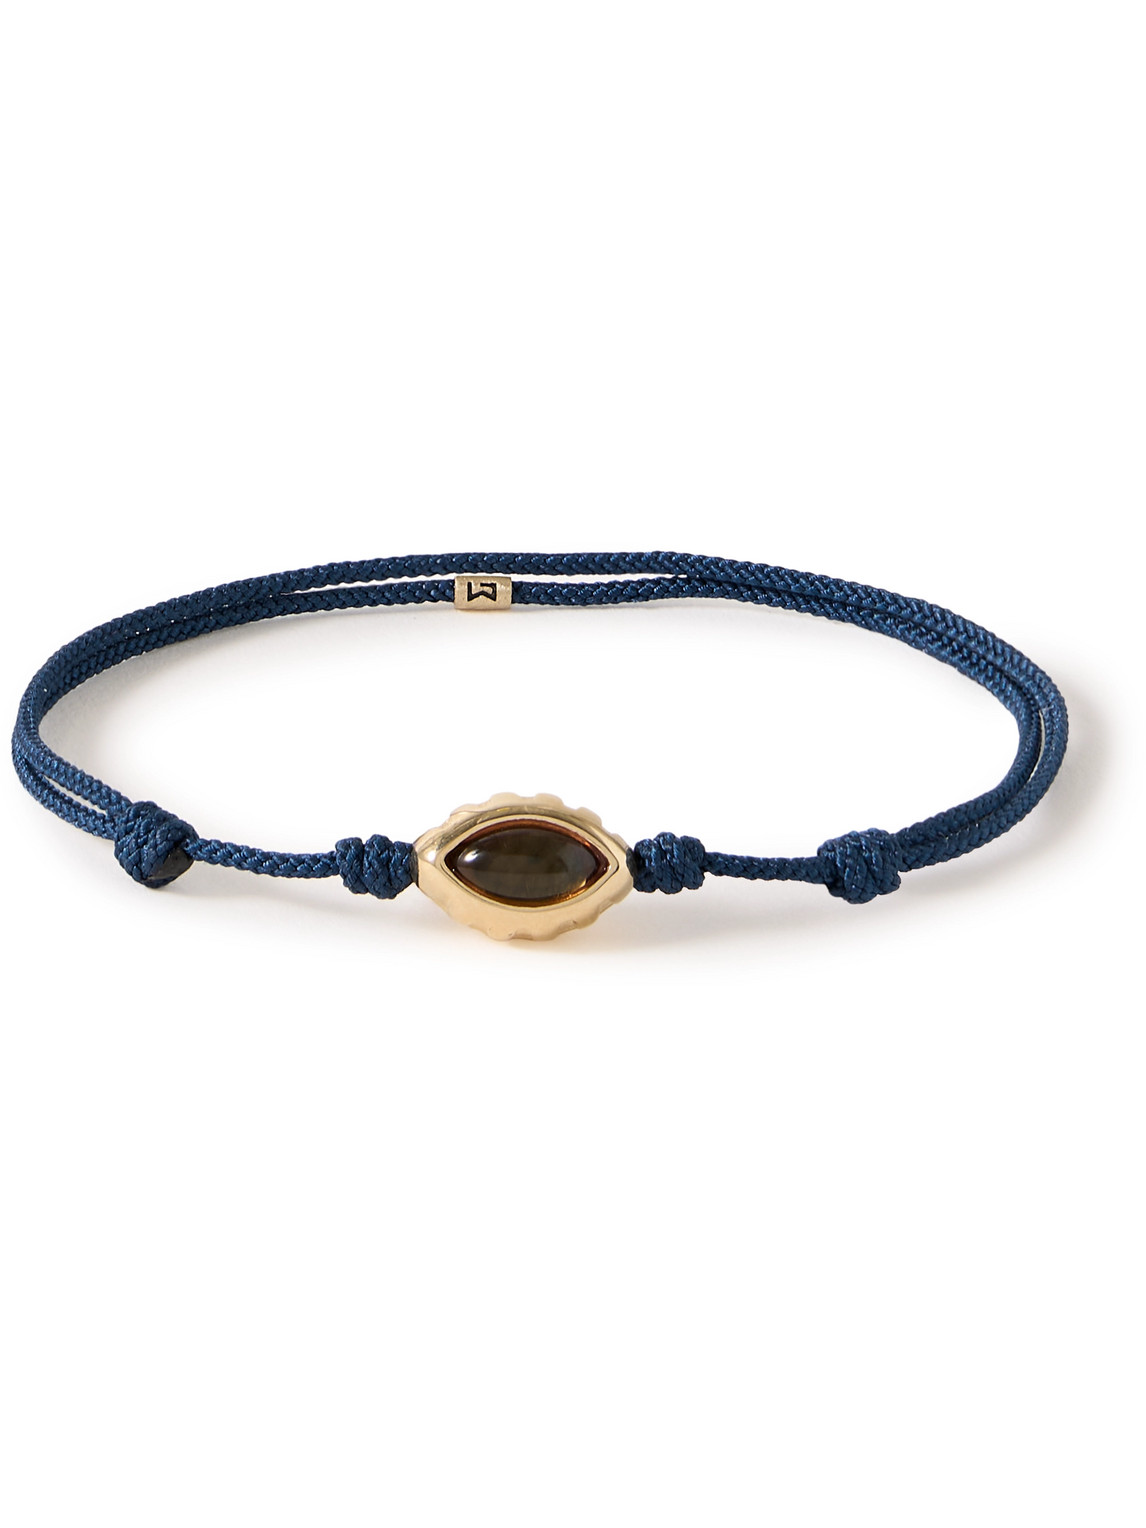 Luis Morais Eye Of The Idol Gold, Citrine And Cord Bracelet In Blue